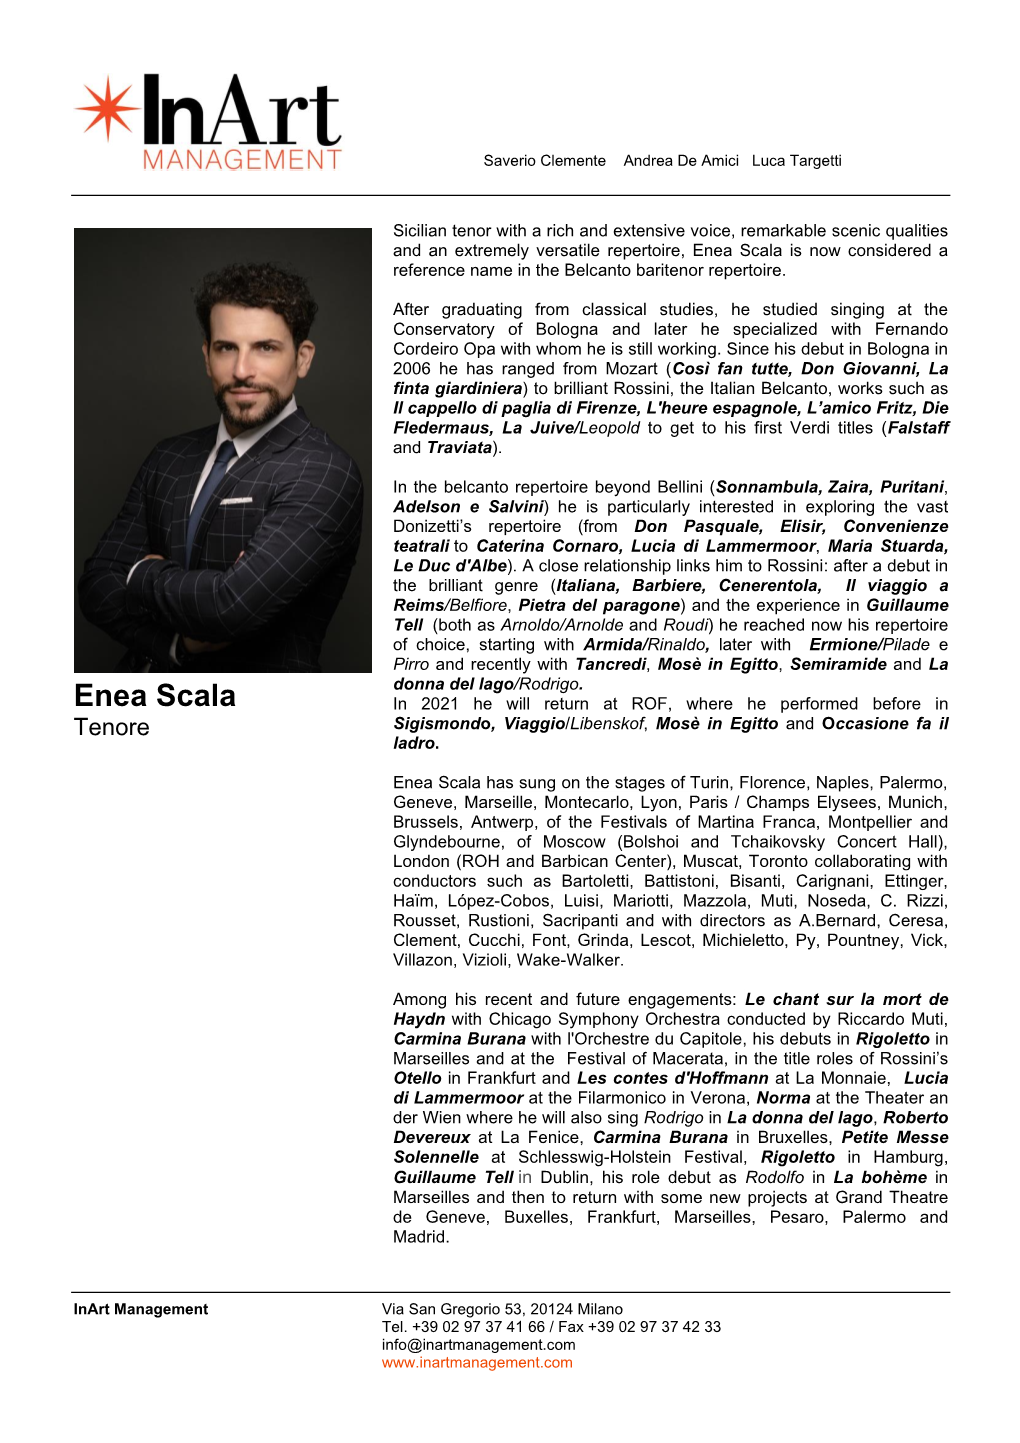 Enea Scala Is Now Considered a Reference Name in the Belcanto Baritenor Repertoire